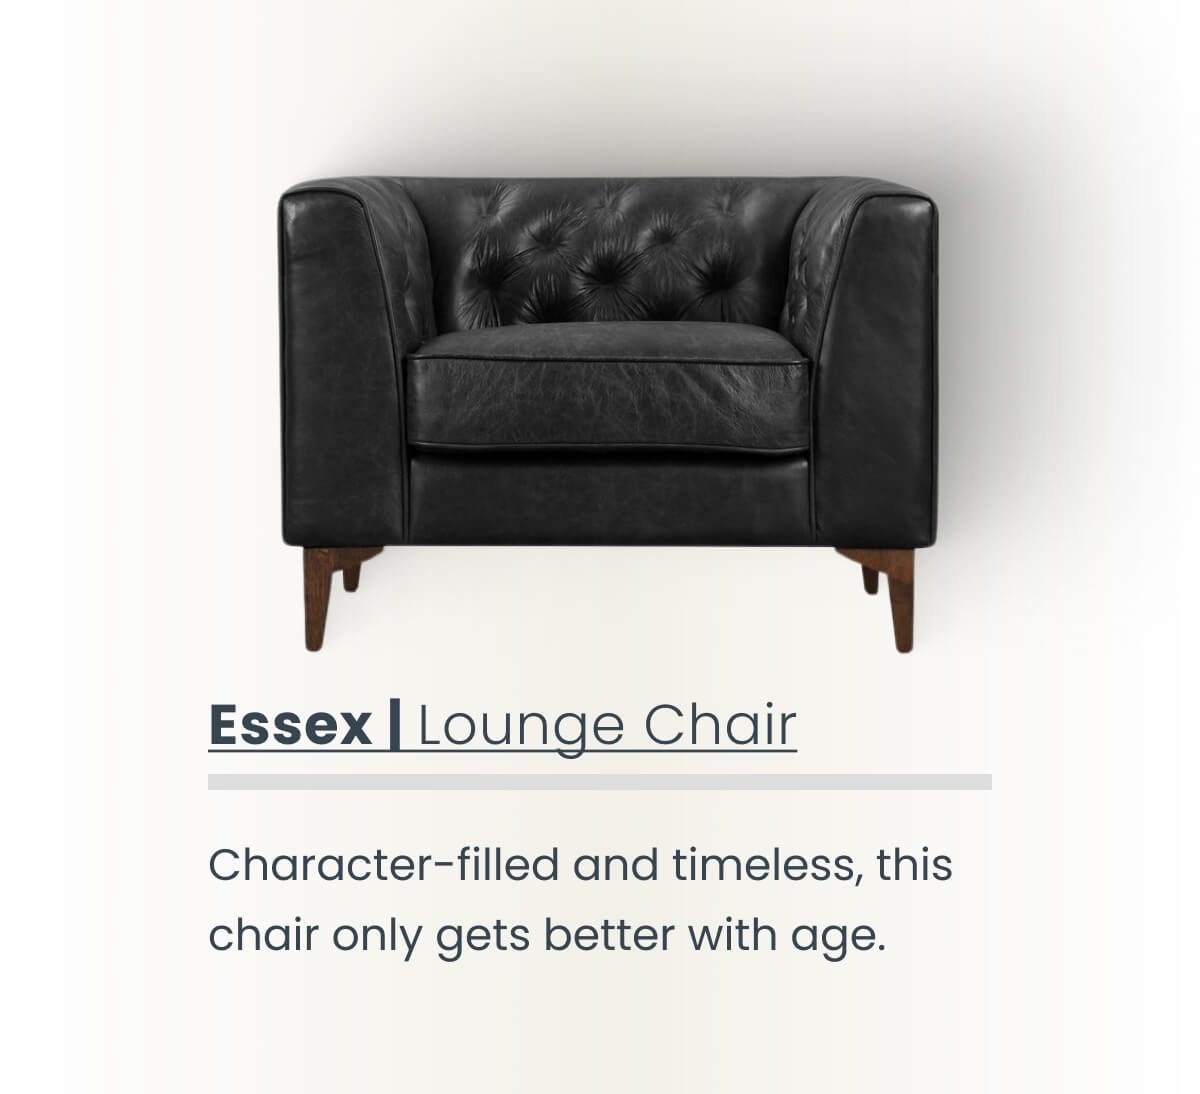 Essex | Lounge Chair Character-filled and timeless, this chair only gets better with age.